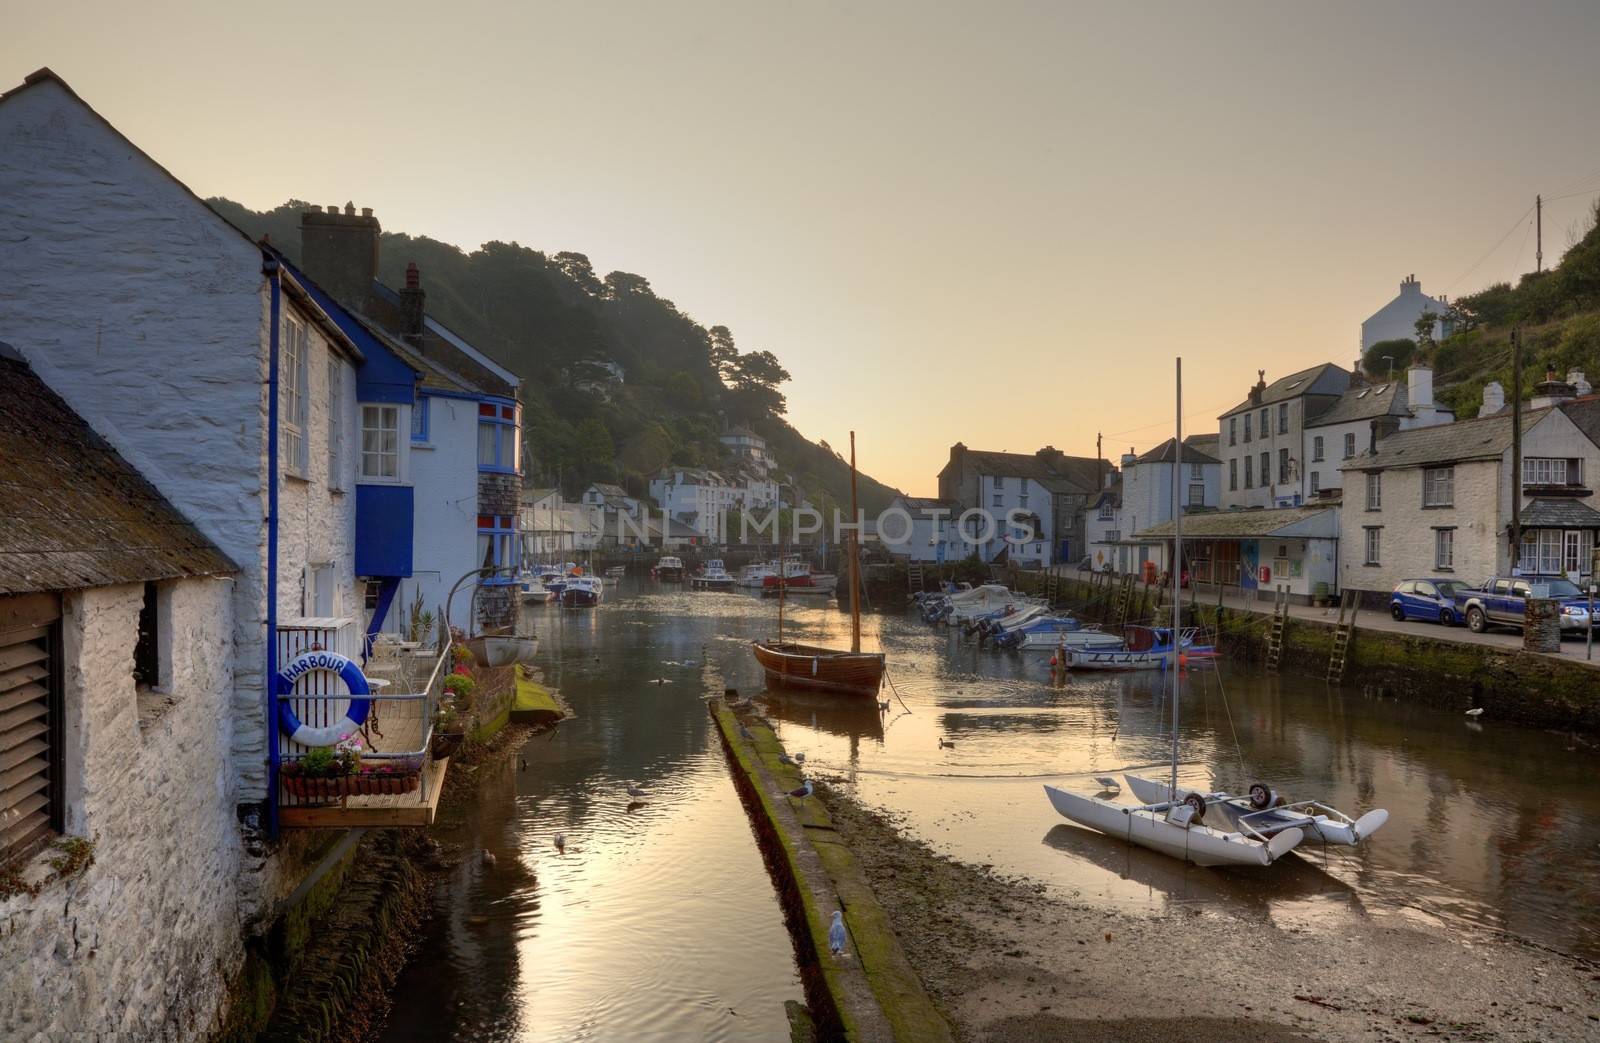 Polperro Harbour by andrewroland